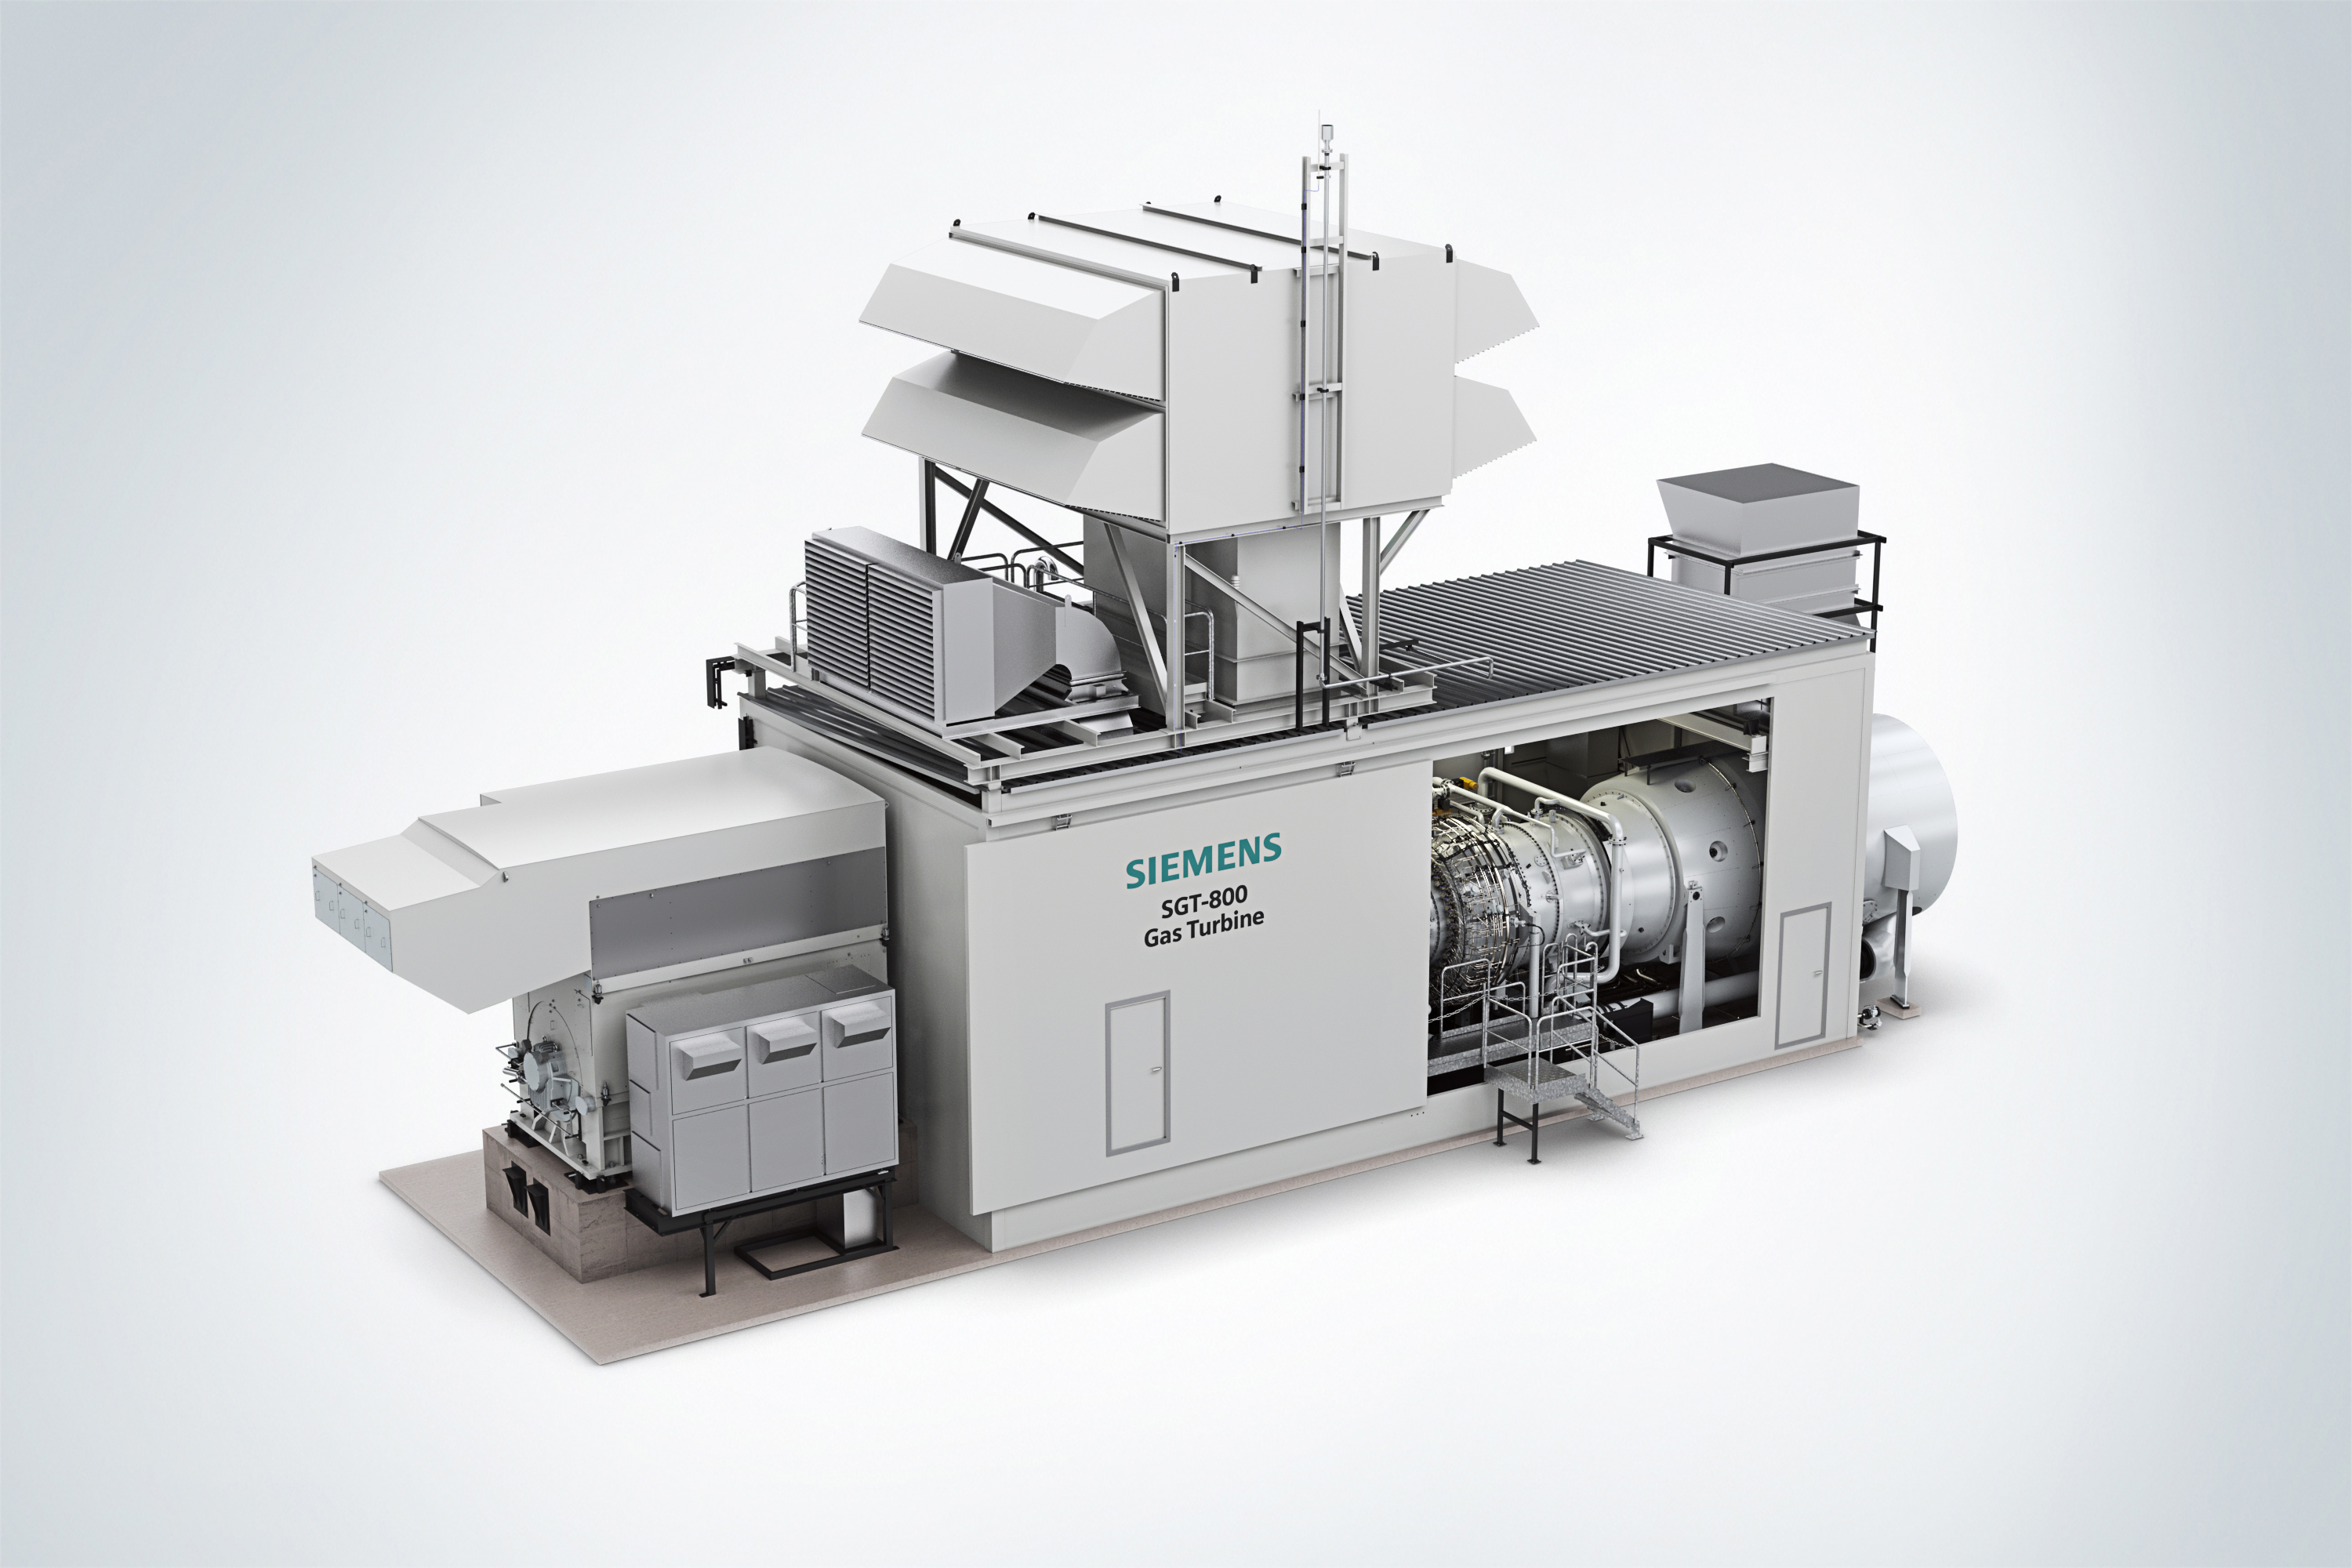 Siemens gas turbines picked for Mozambique LNG project